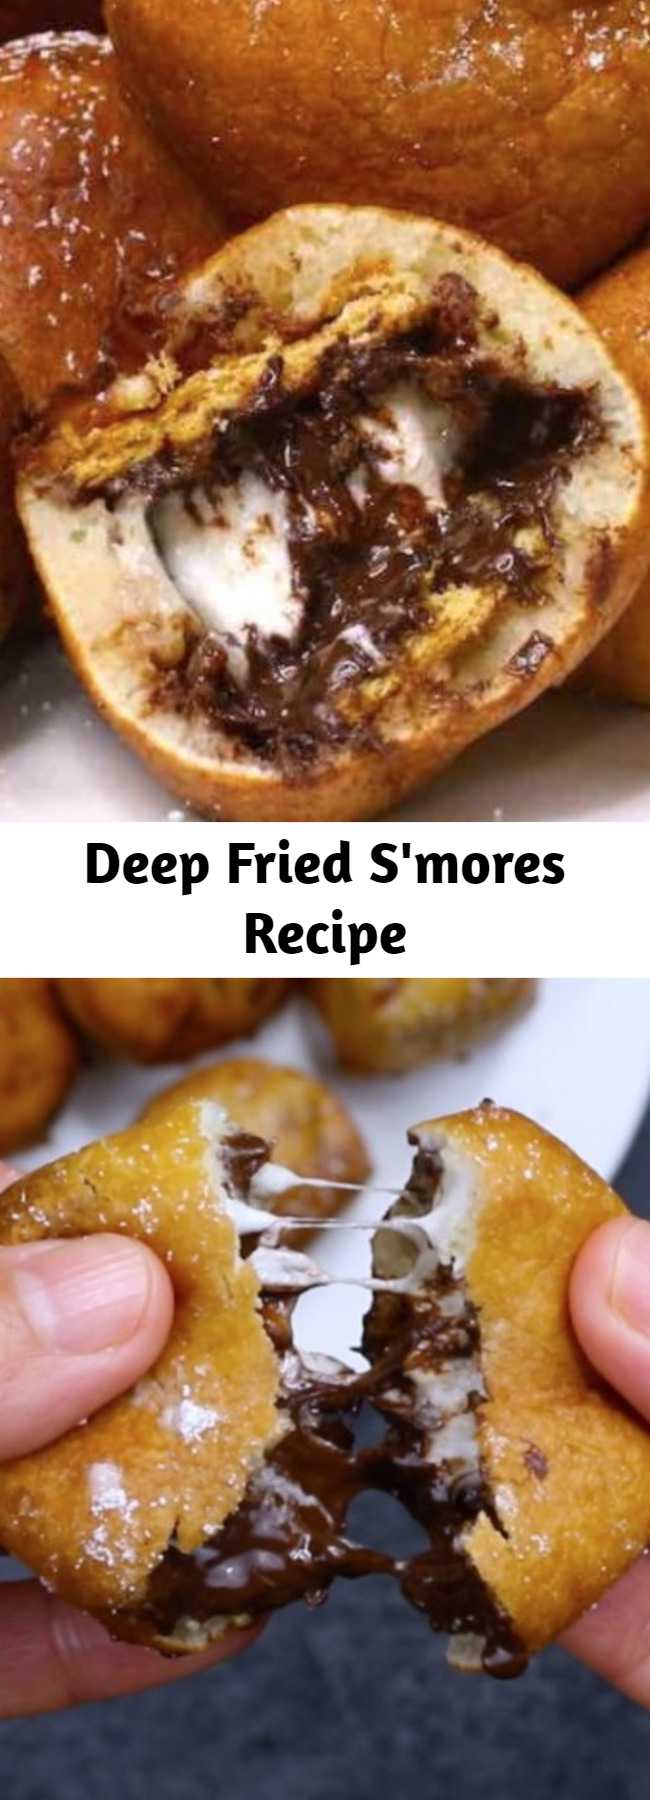 Deep Fried S'mores Recipe - These Deep Fried S’mores are golden on the outside and fluffy inside with delicious graham cracker, chocolate and marshmallow flavors. They melt in your mouth with irresistible s’mores flavors! A great dessert for a party!